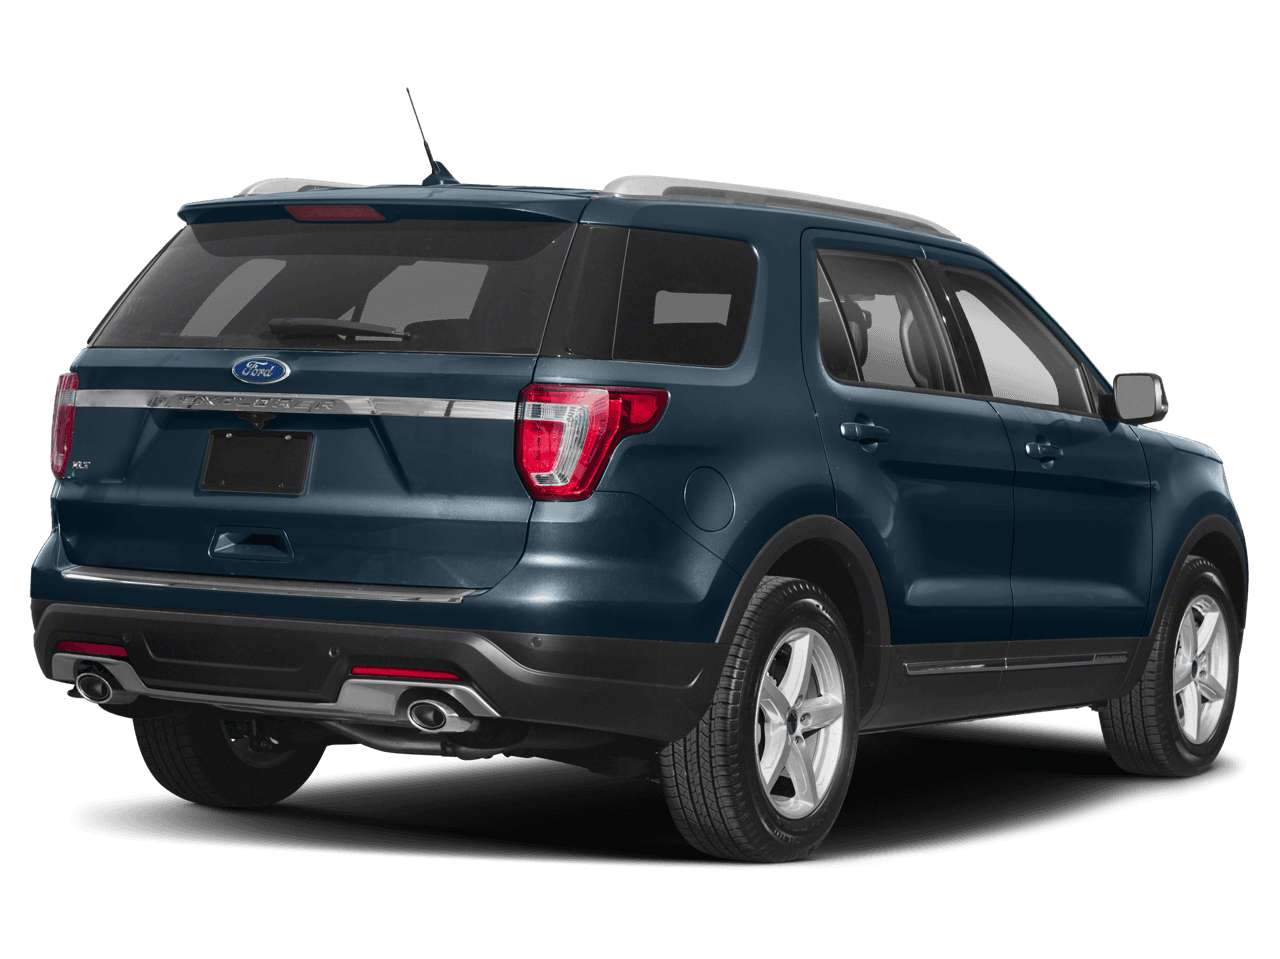 2019 Ford Explorer Photo in Wooster, OH 44691